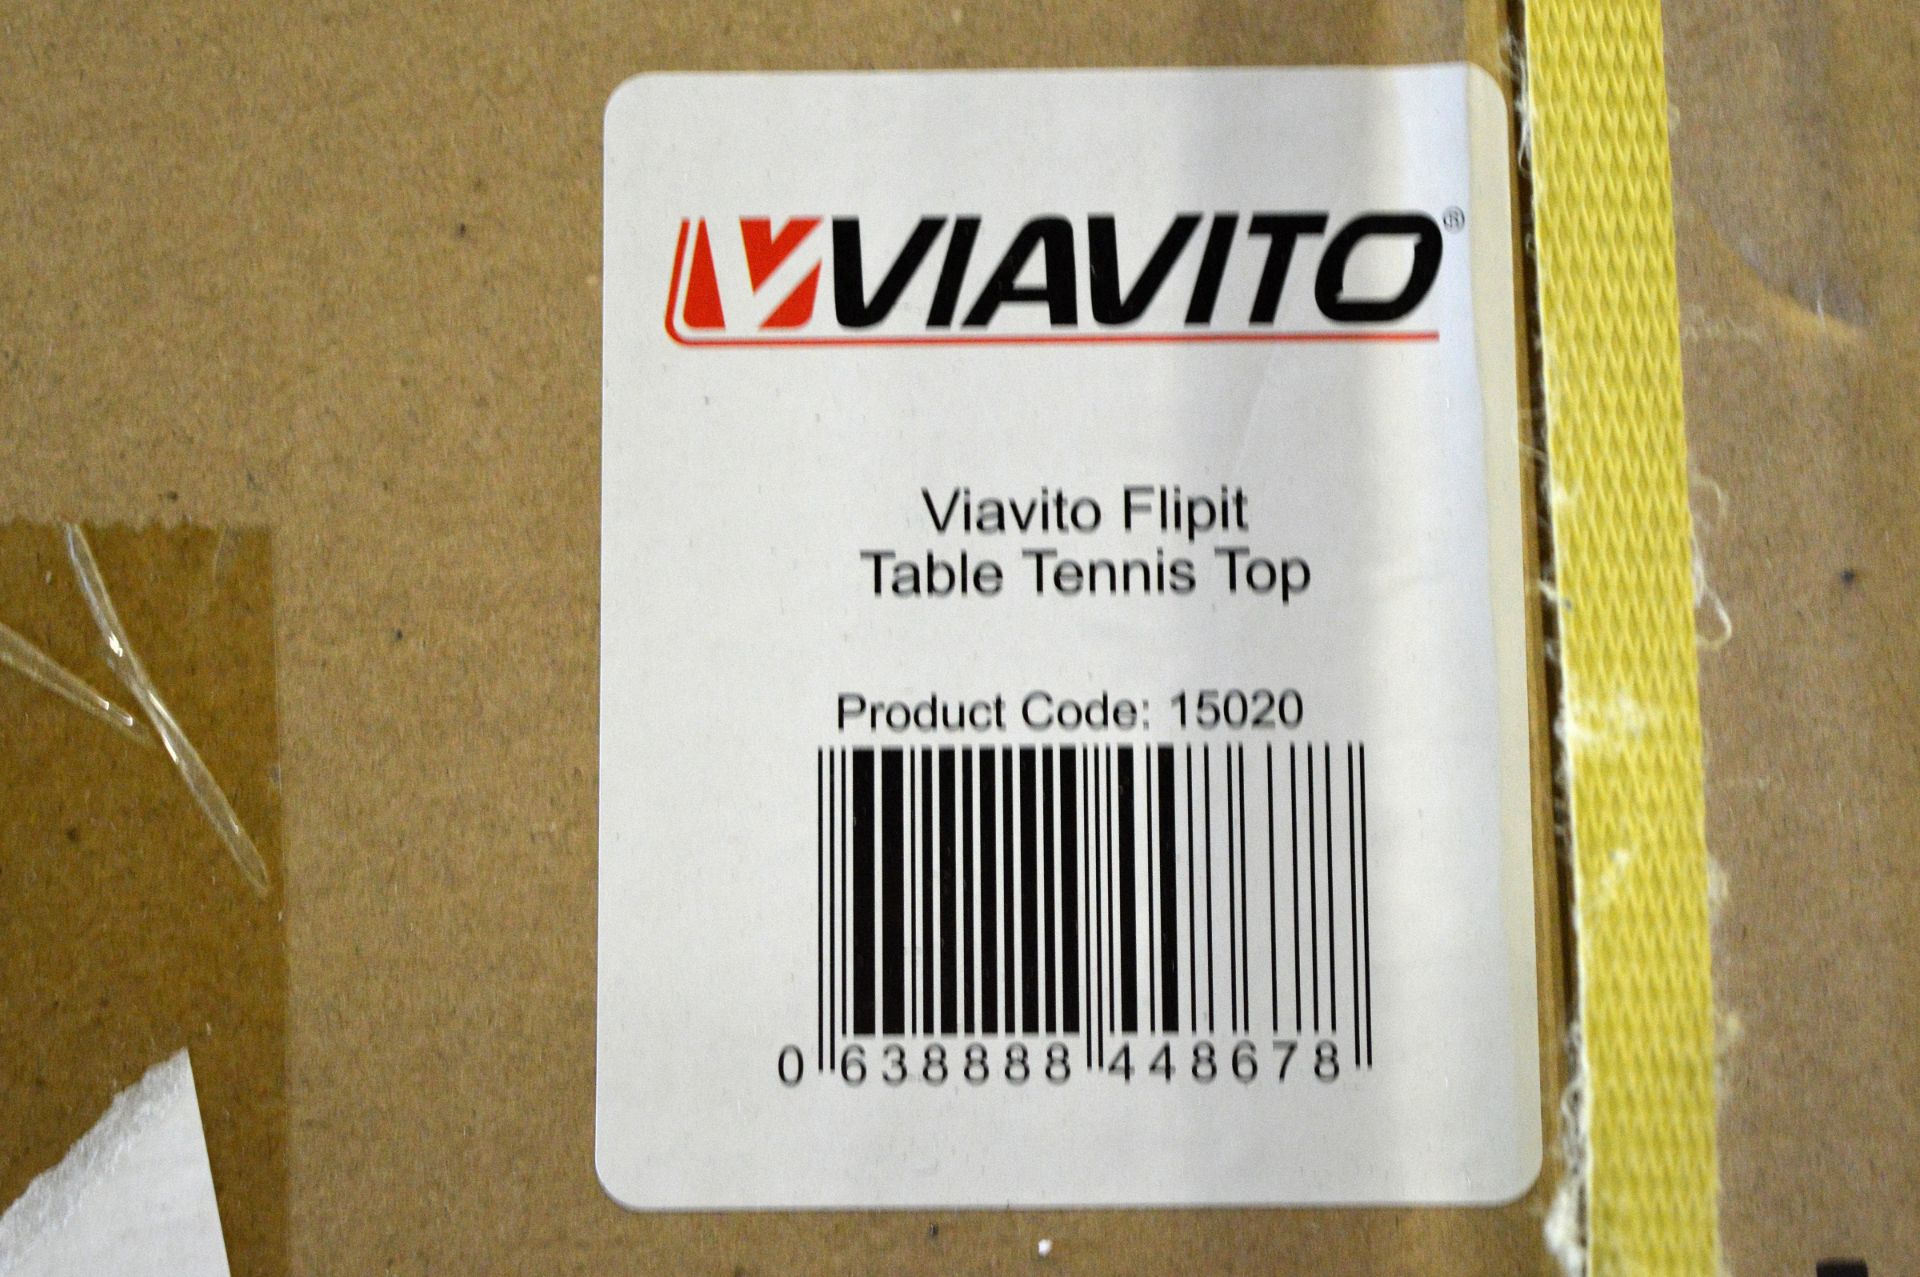 Viavito Flipit Table Tennis and Dining Top - Image 2 of 3